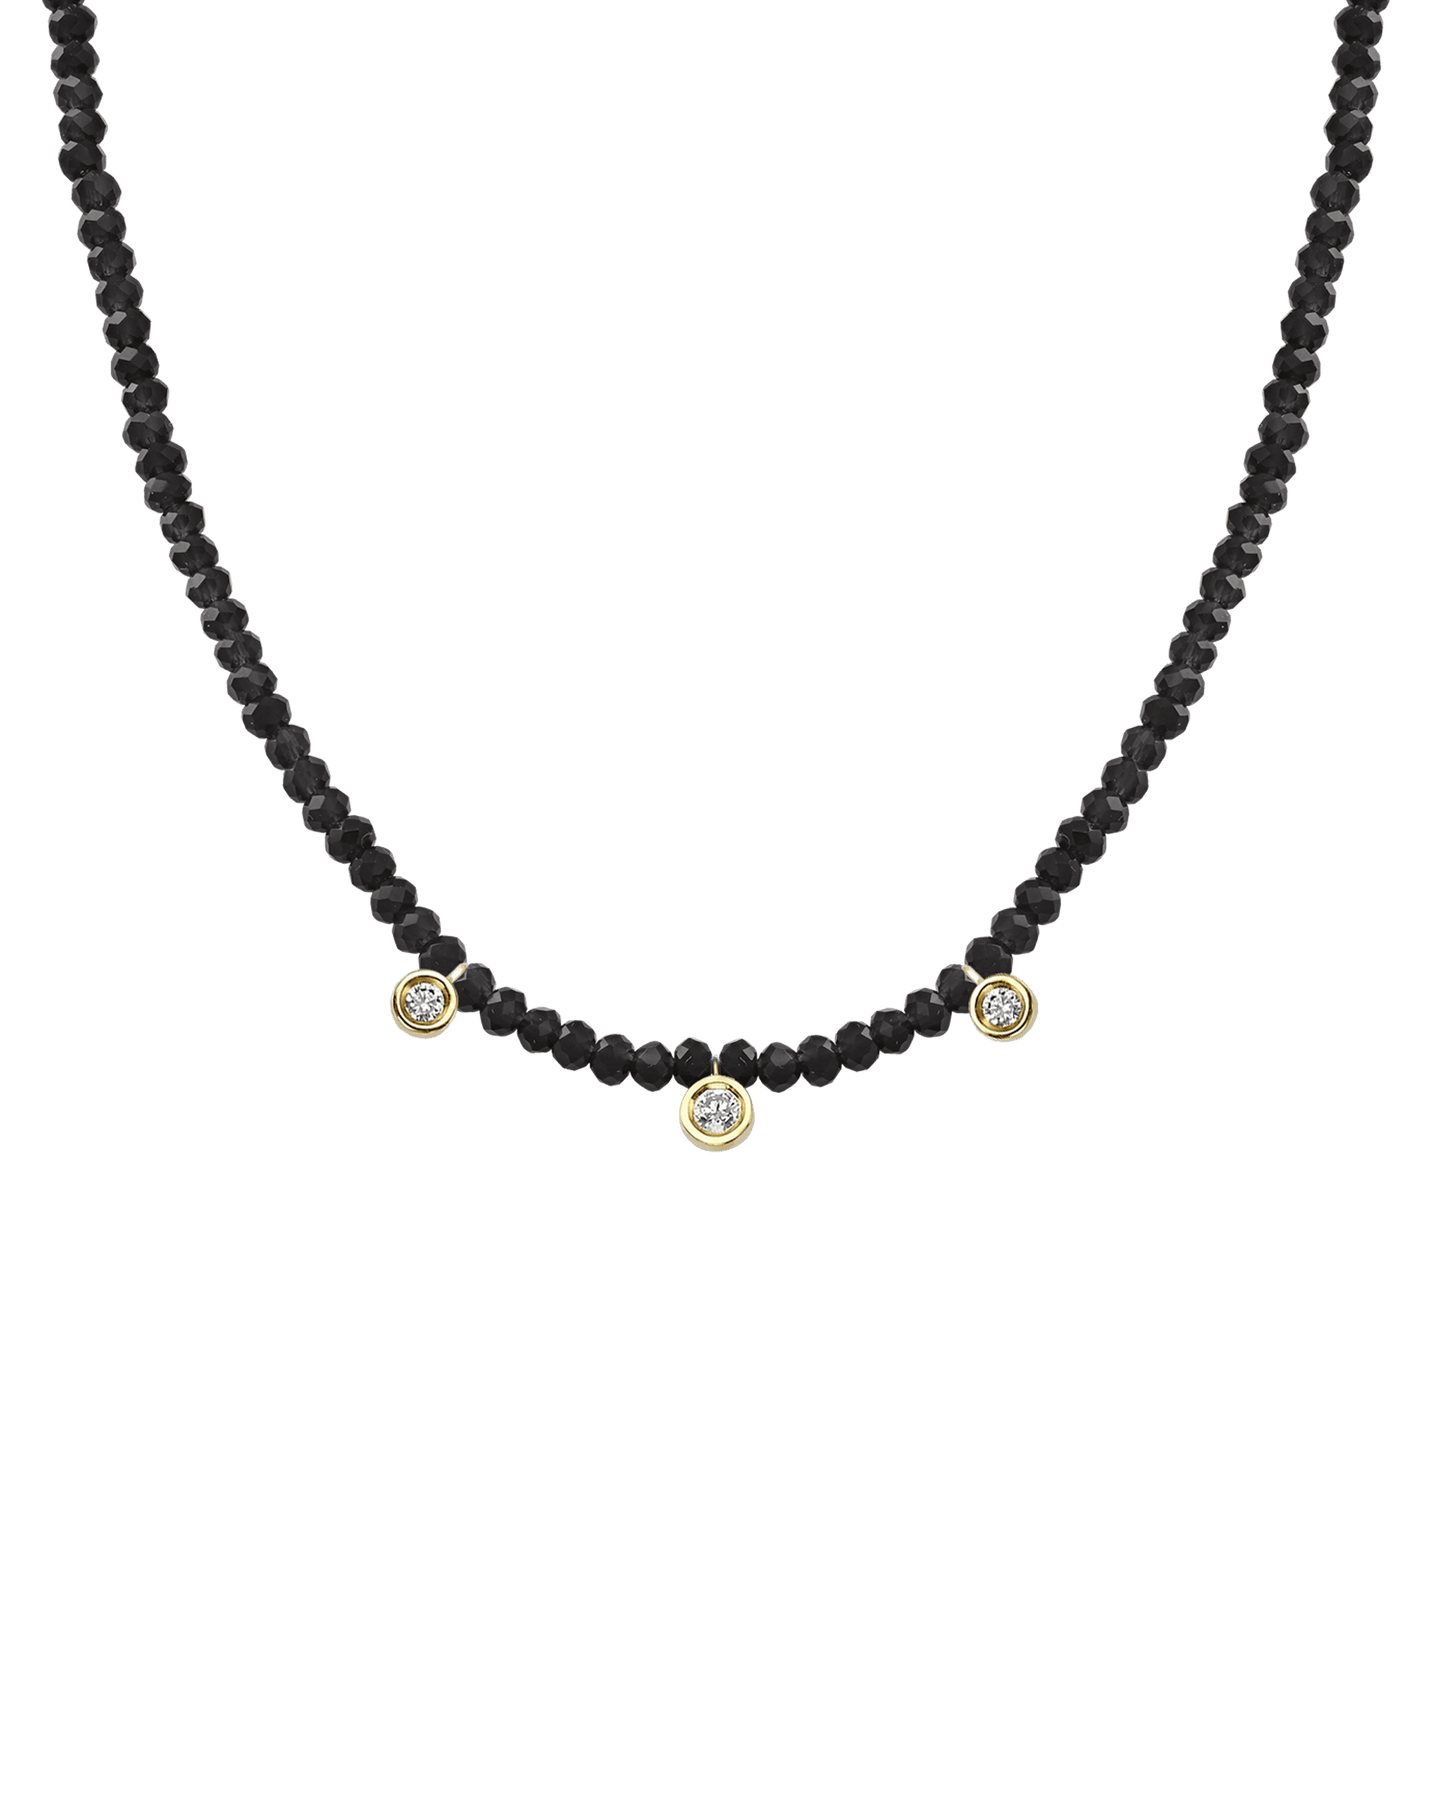 Turquoise Gemstone & Three diamonds Necklace - 14K Yellow Gold Necklaces magal-dev Glass Beads Black Spinnel 14" - Collar 